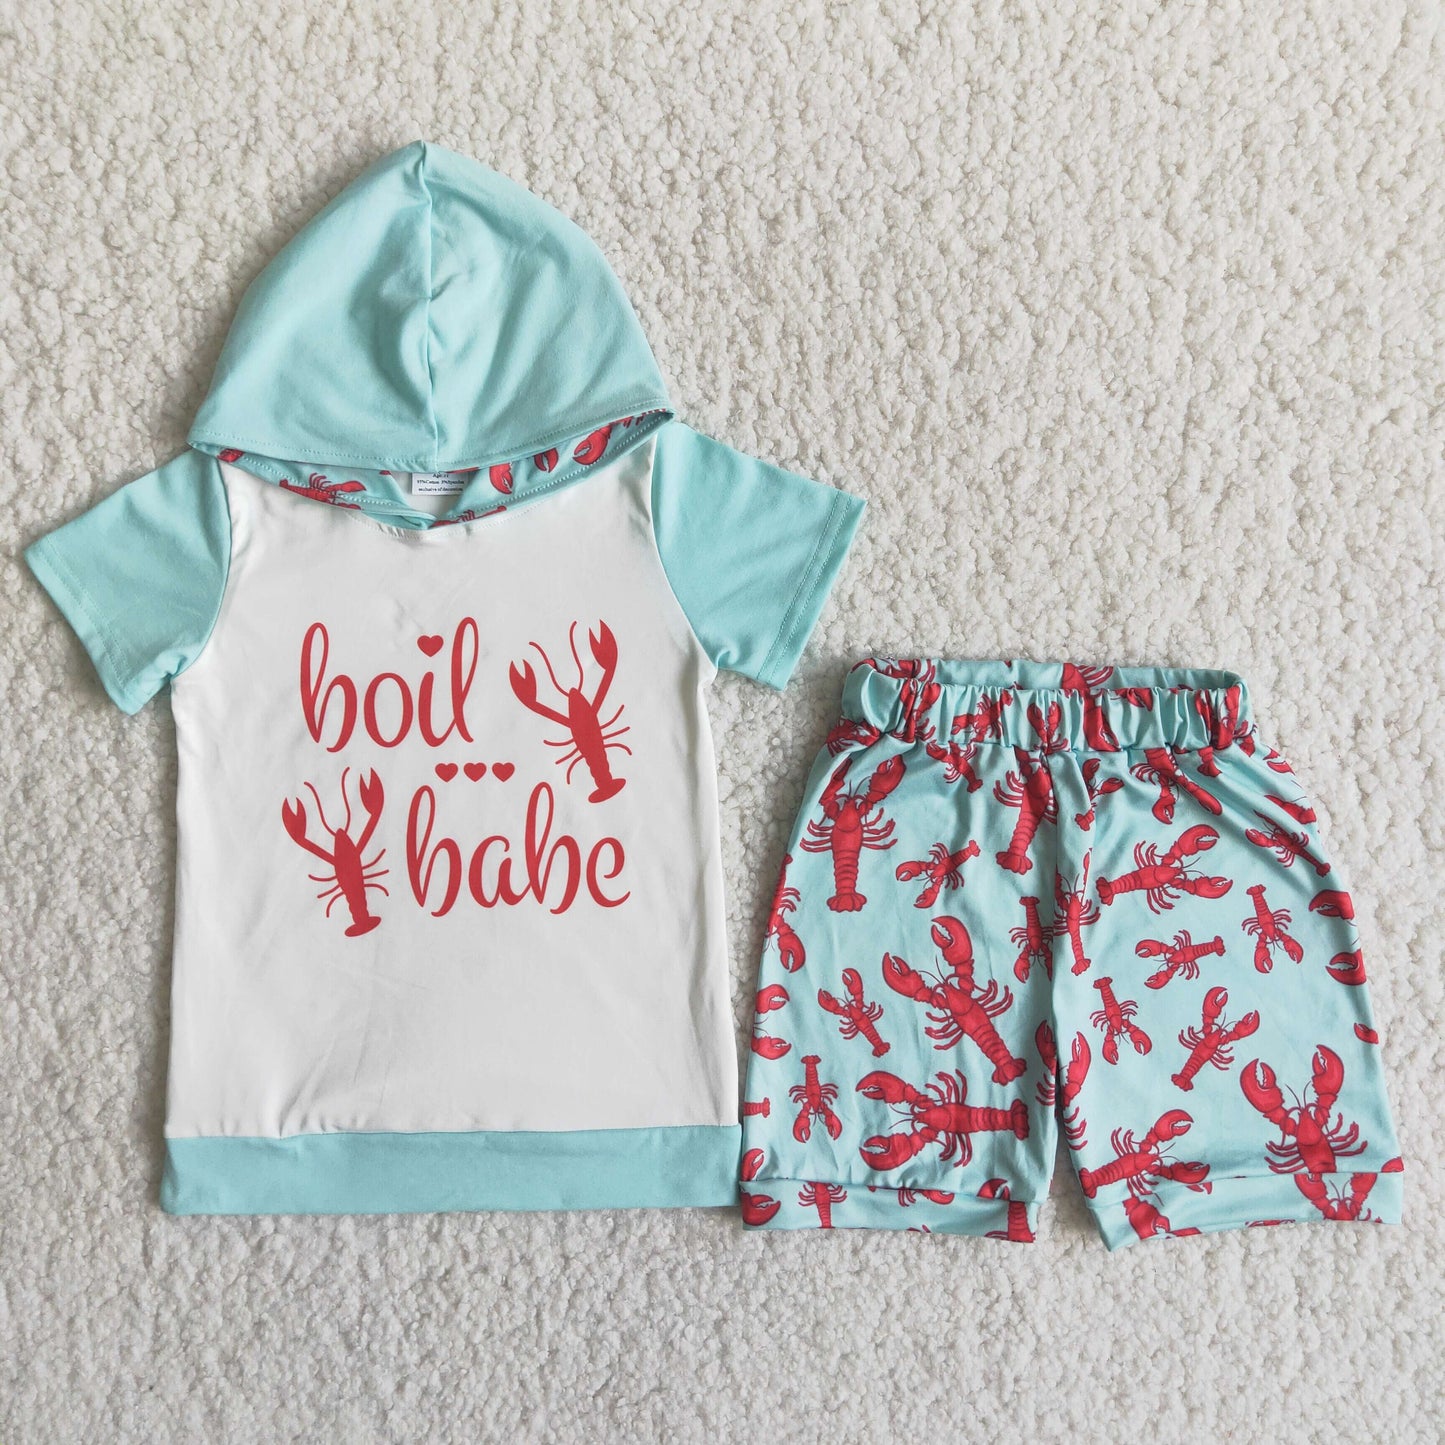 lobster boy hooded summer outfits